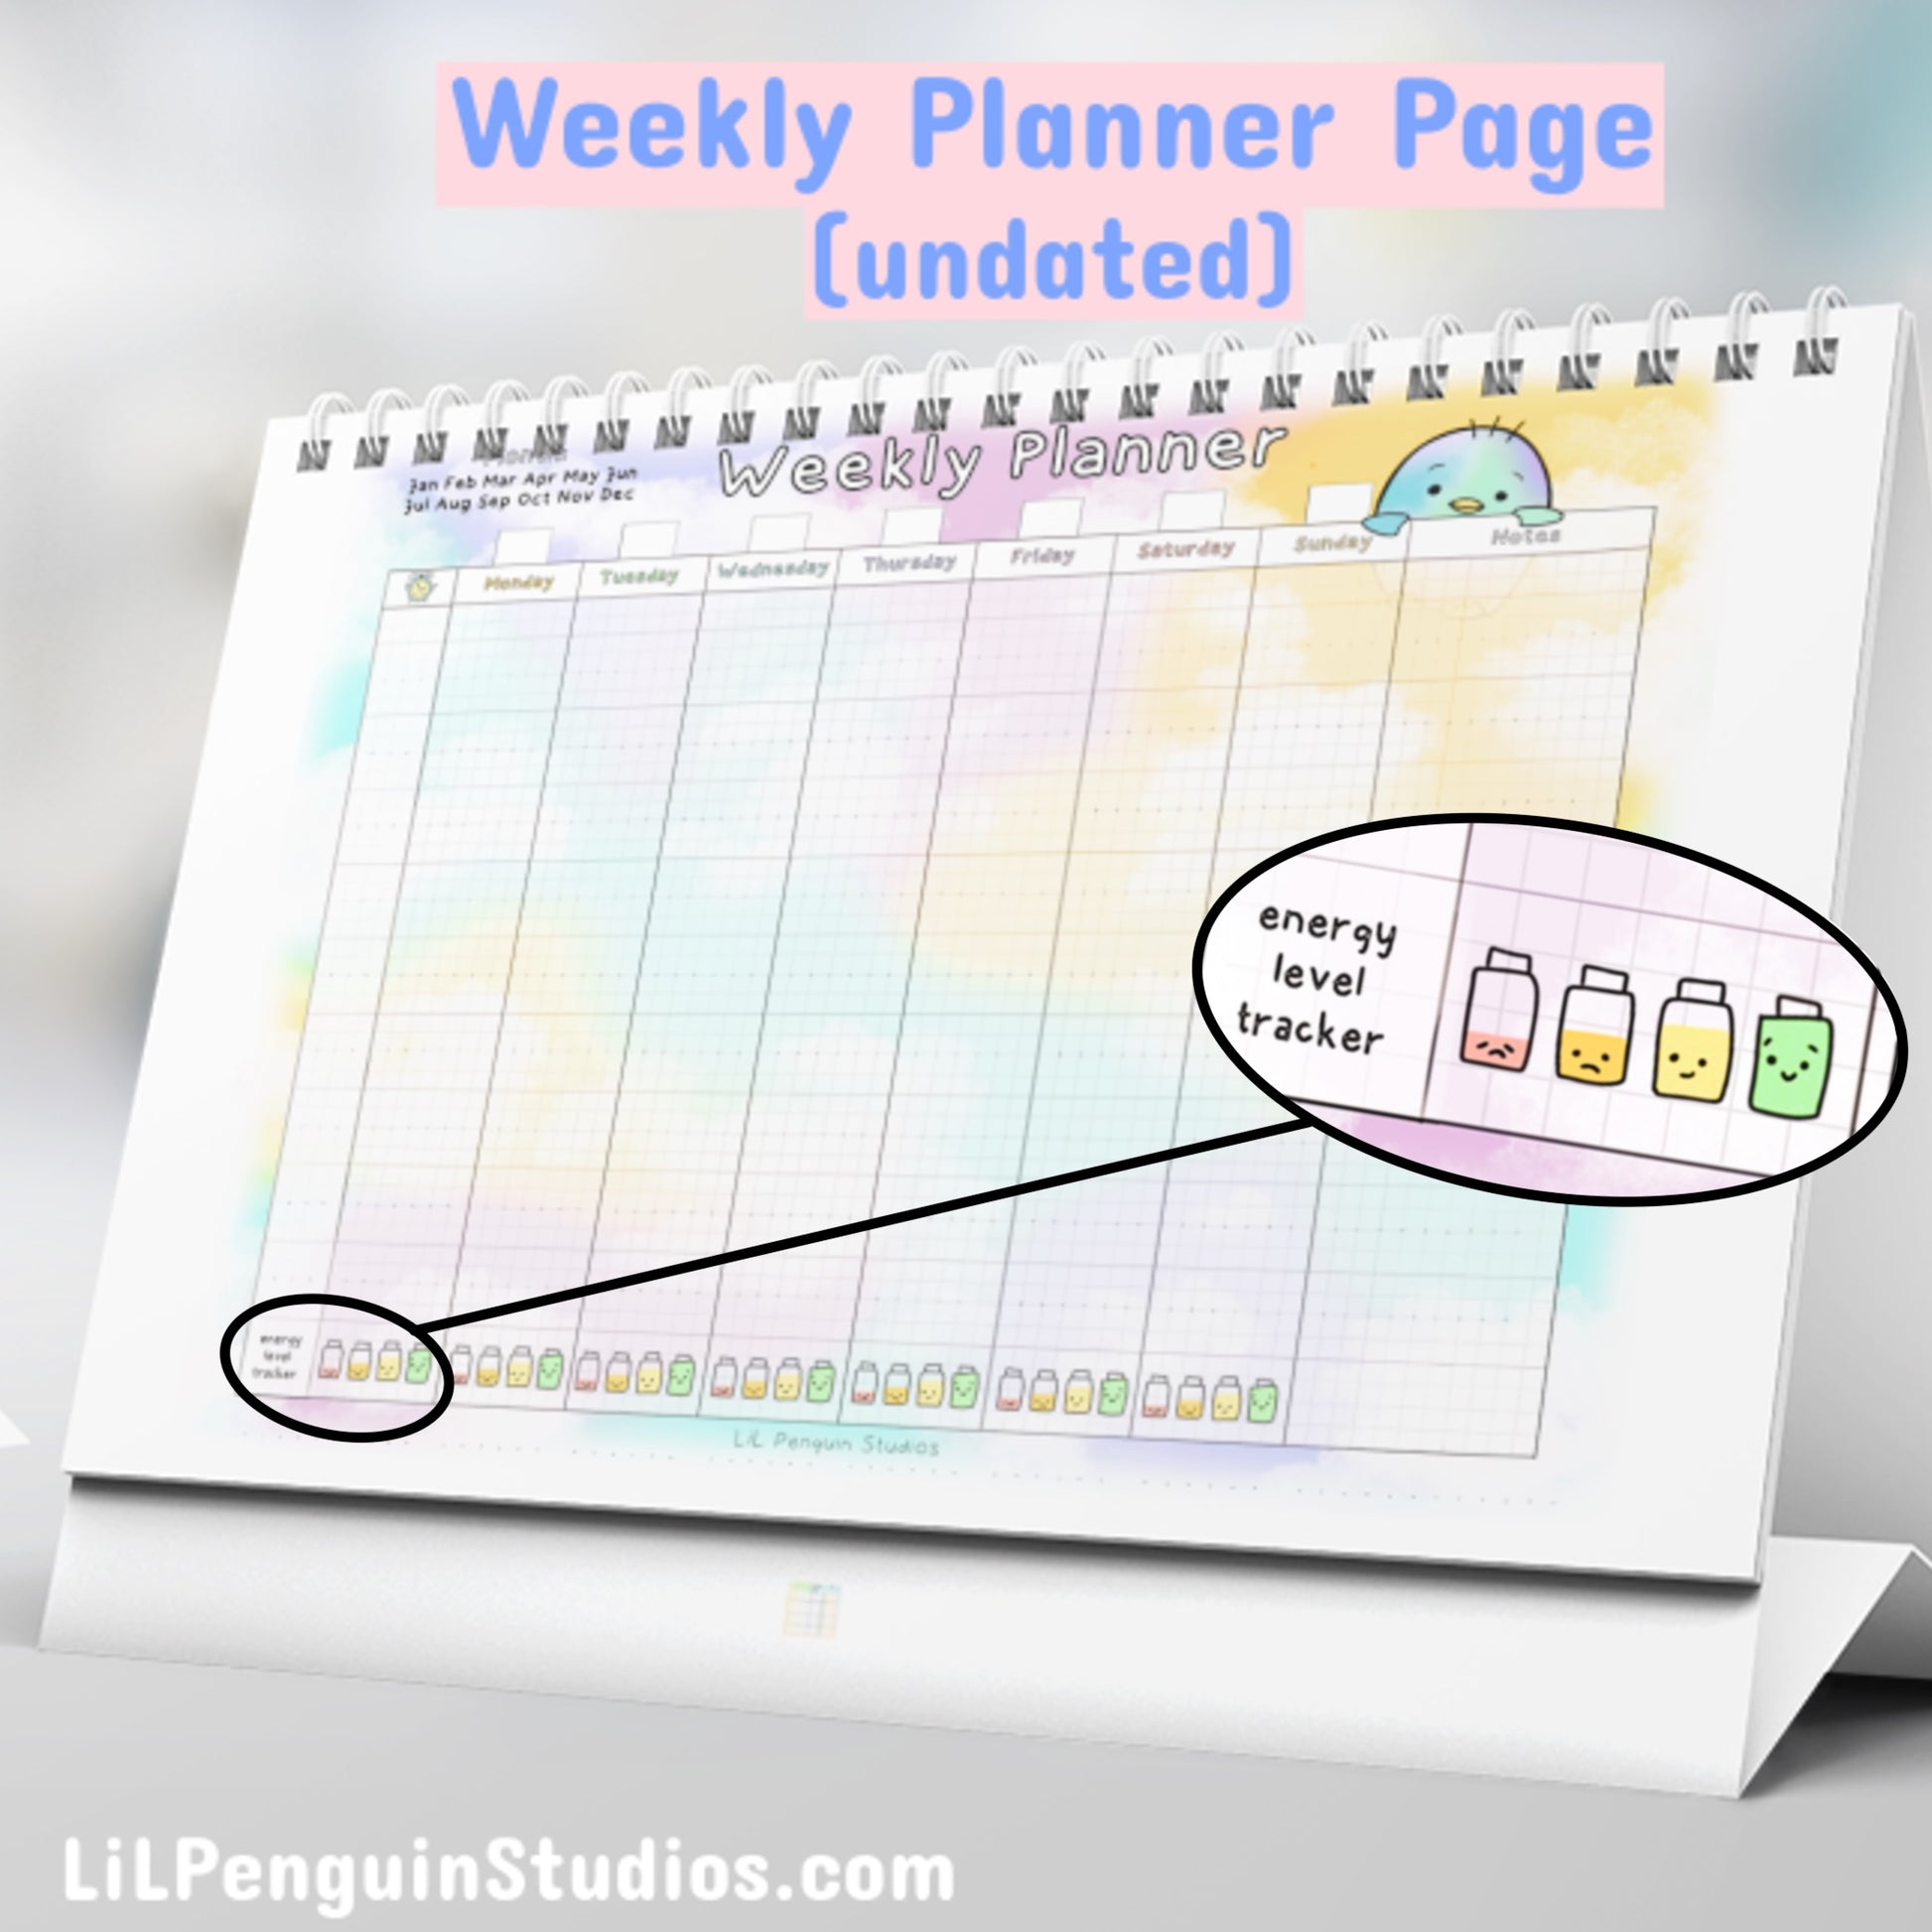 Printable Weekly Planner Inserts. Written and hand-drawn by an autistic artist (LiL Penguin Studios (autism_happy_plance on Instagram)